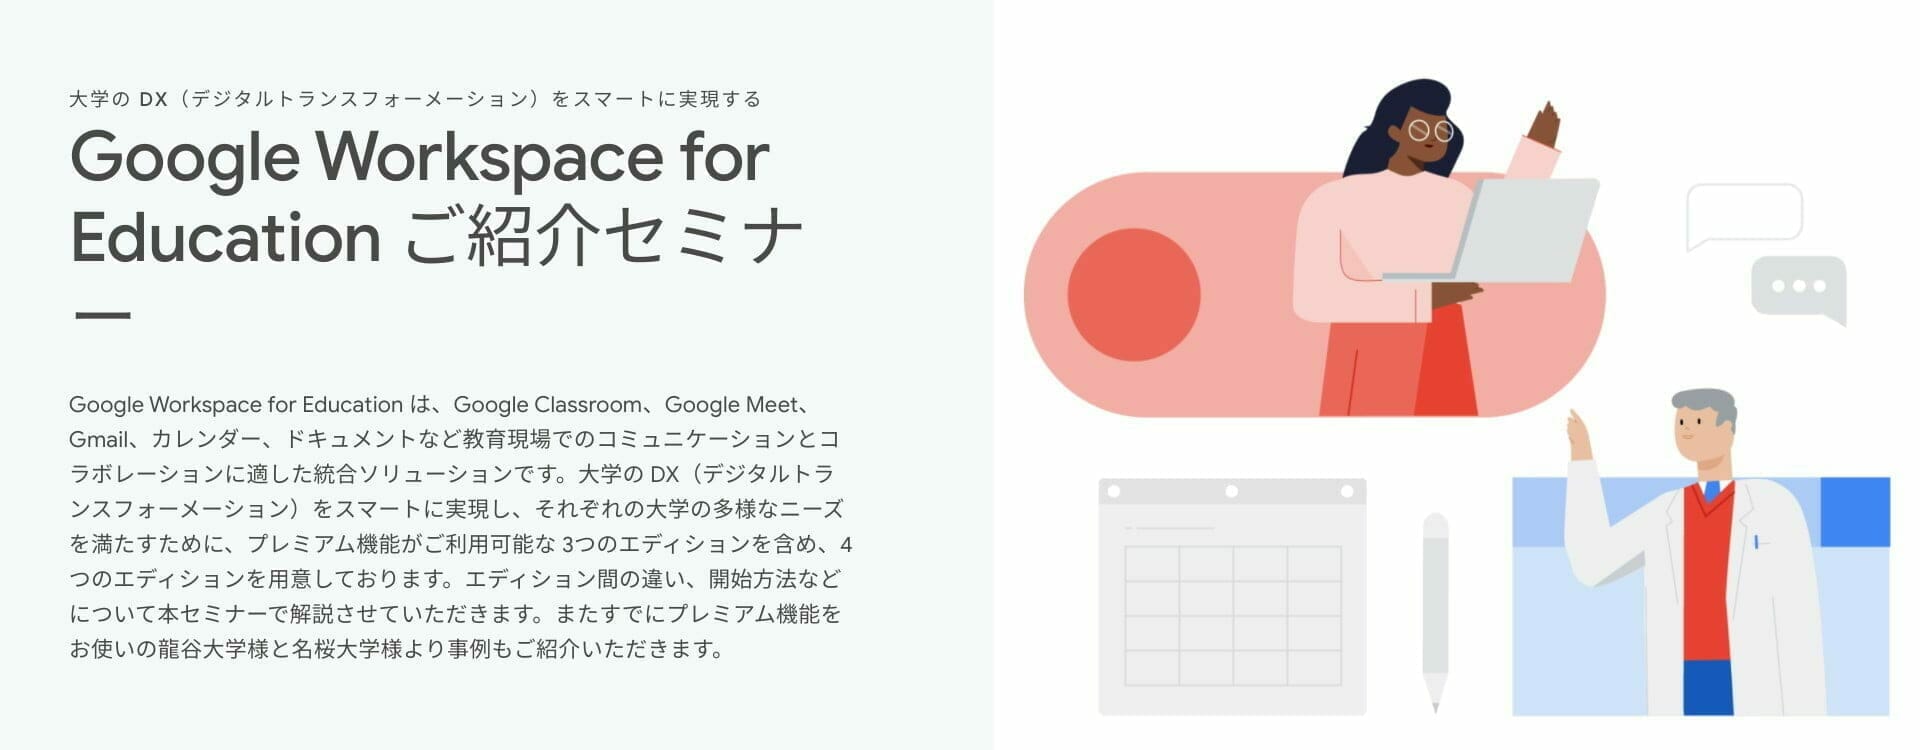 [Google for Education] Google Workspace for Education ご紹介セミナー